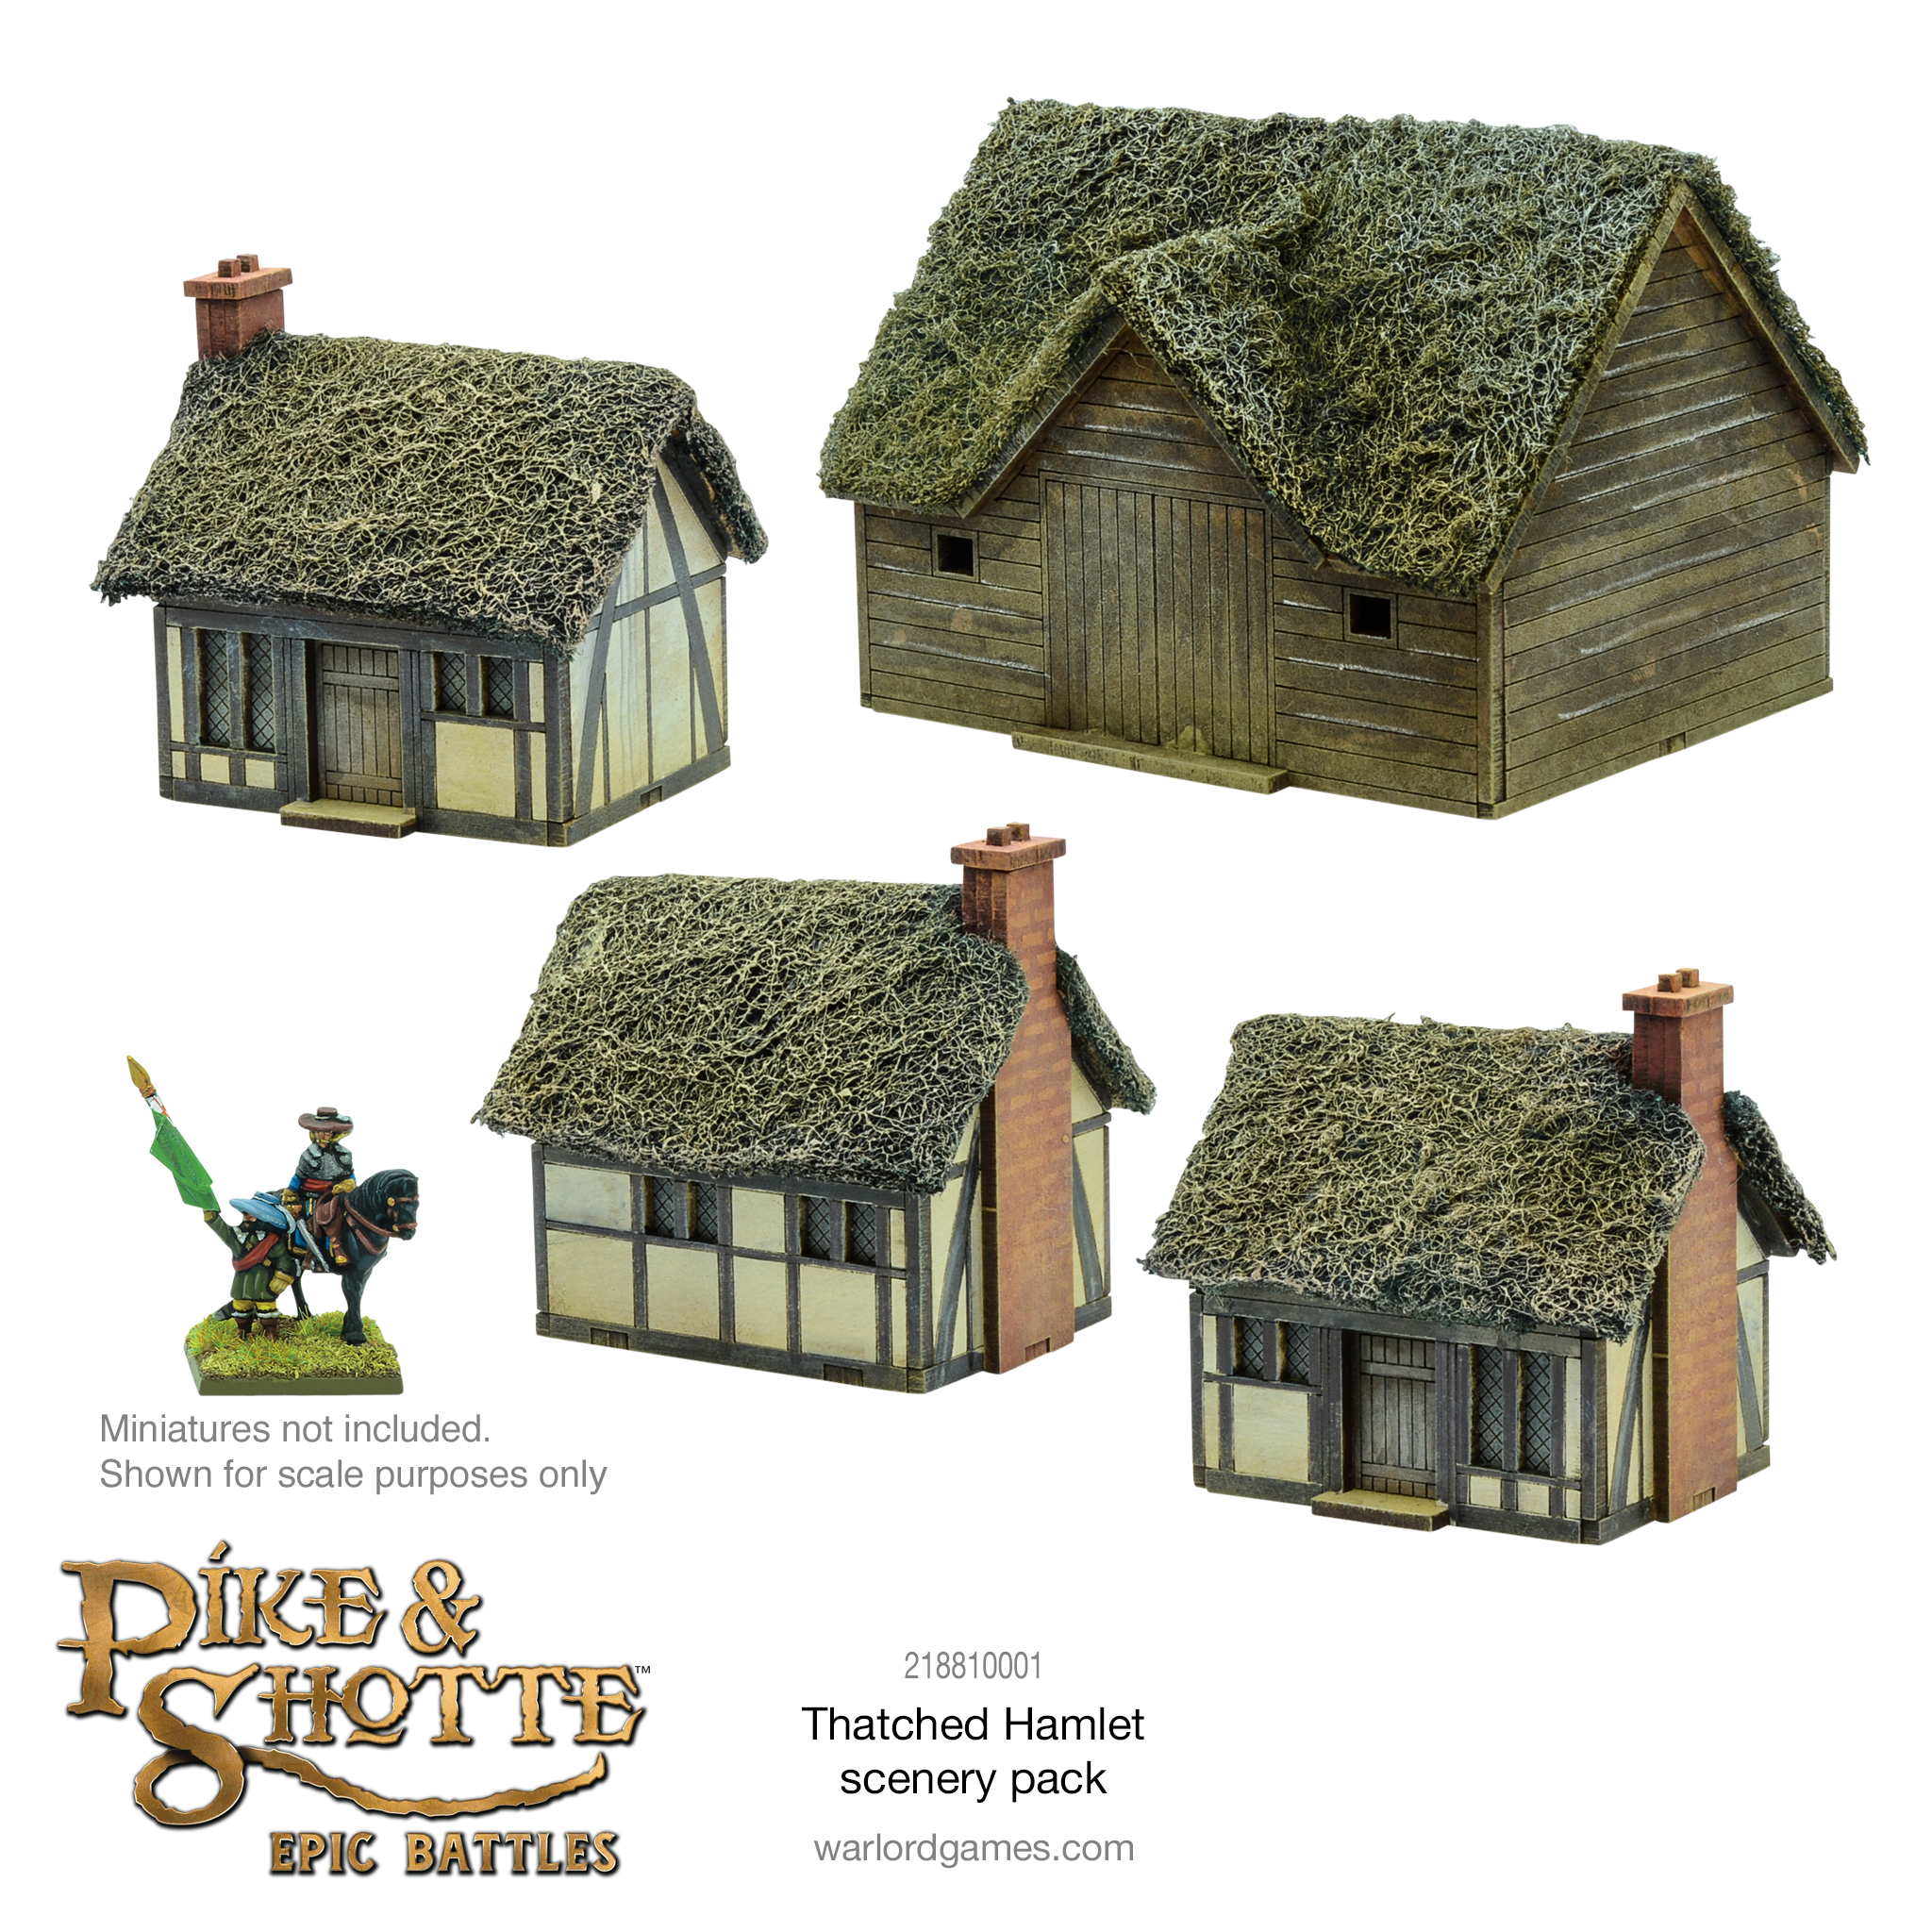 Thatched Hamlet Scenery Pack - Pike & Shotte Epic Battles